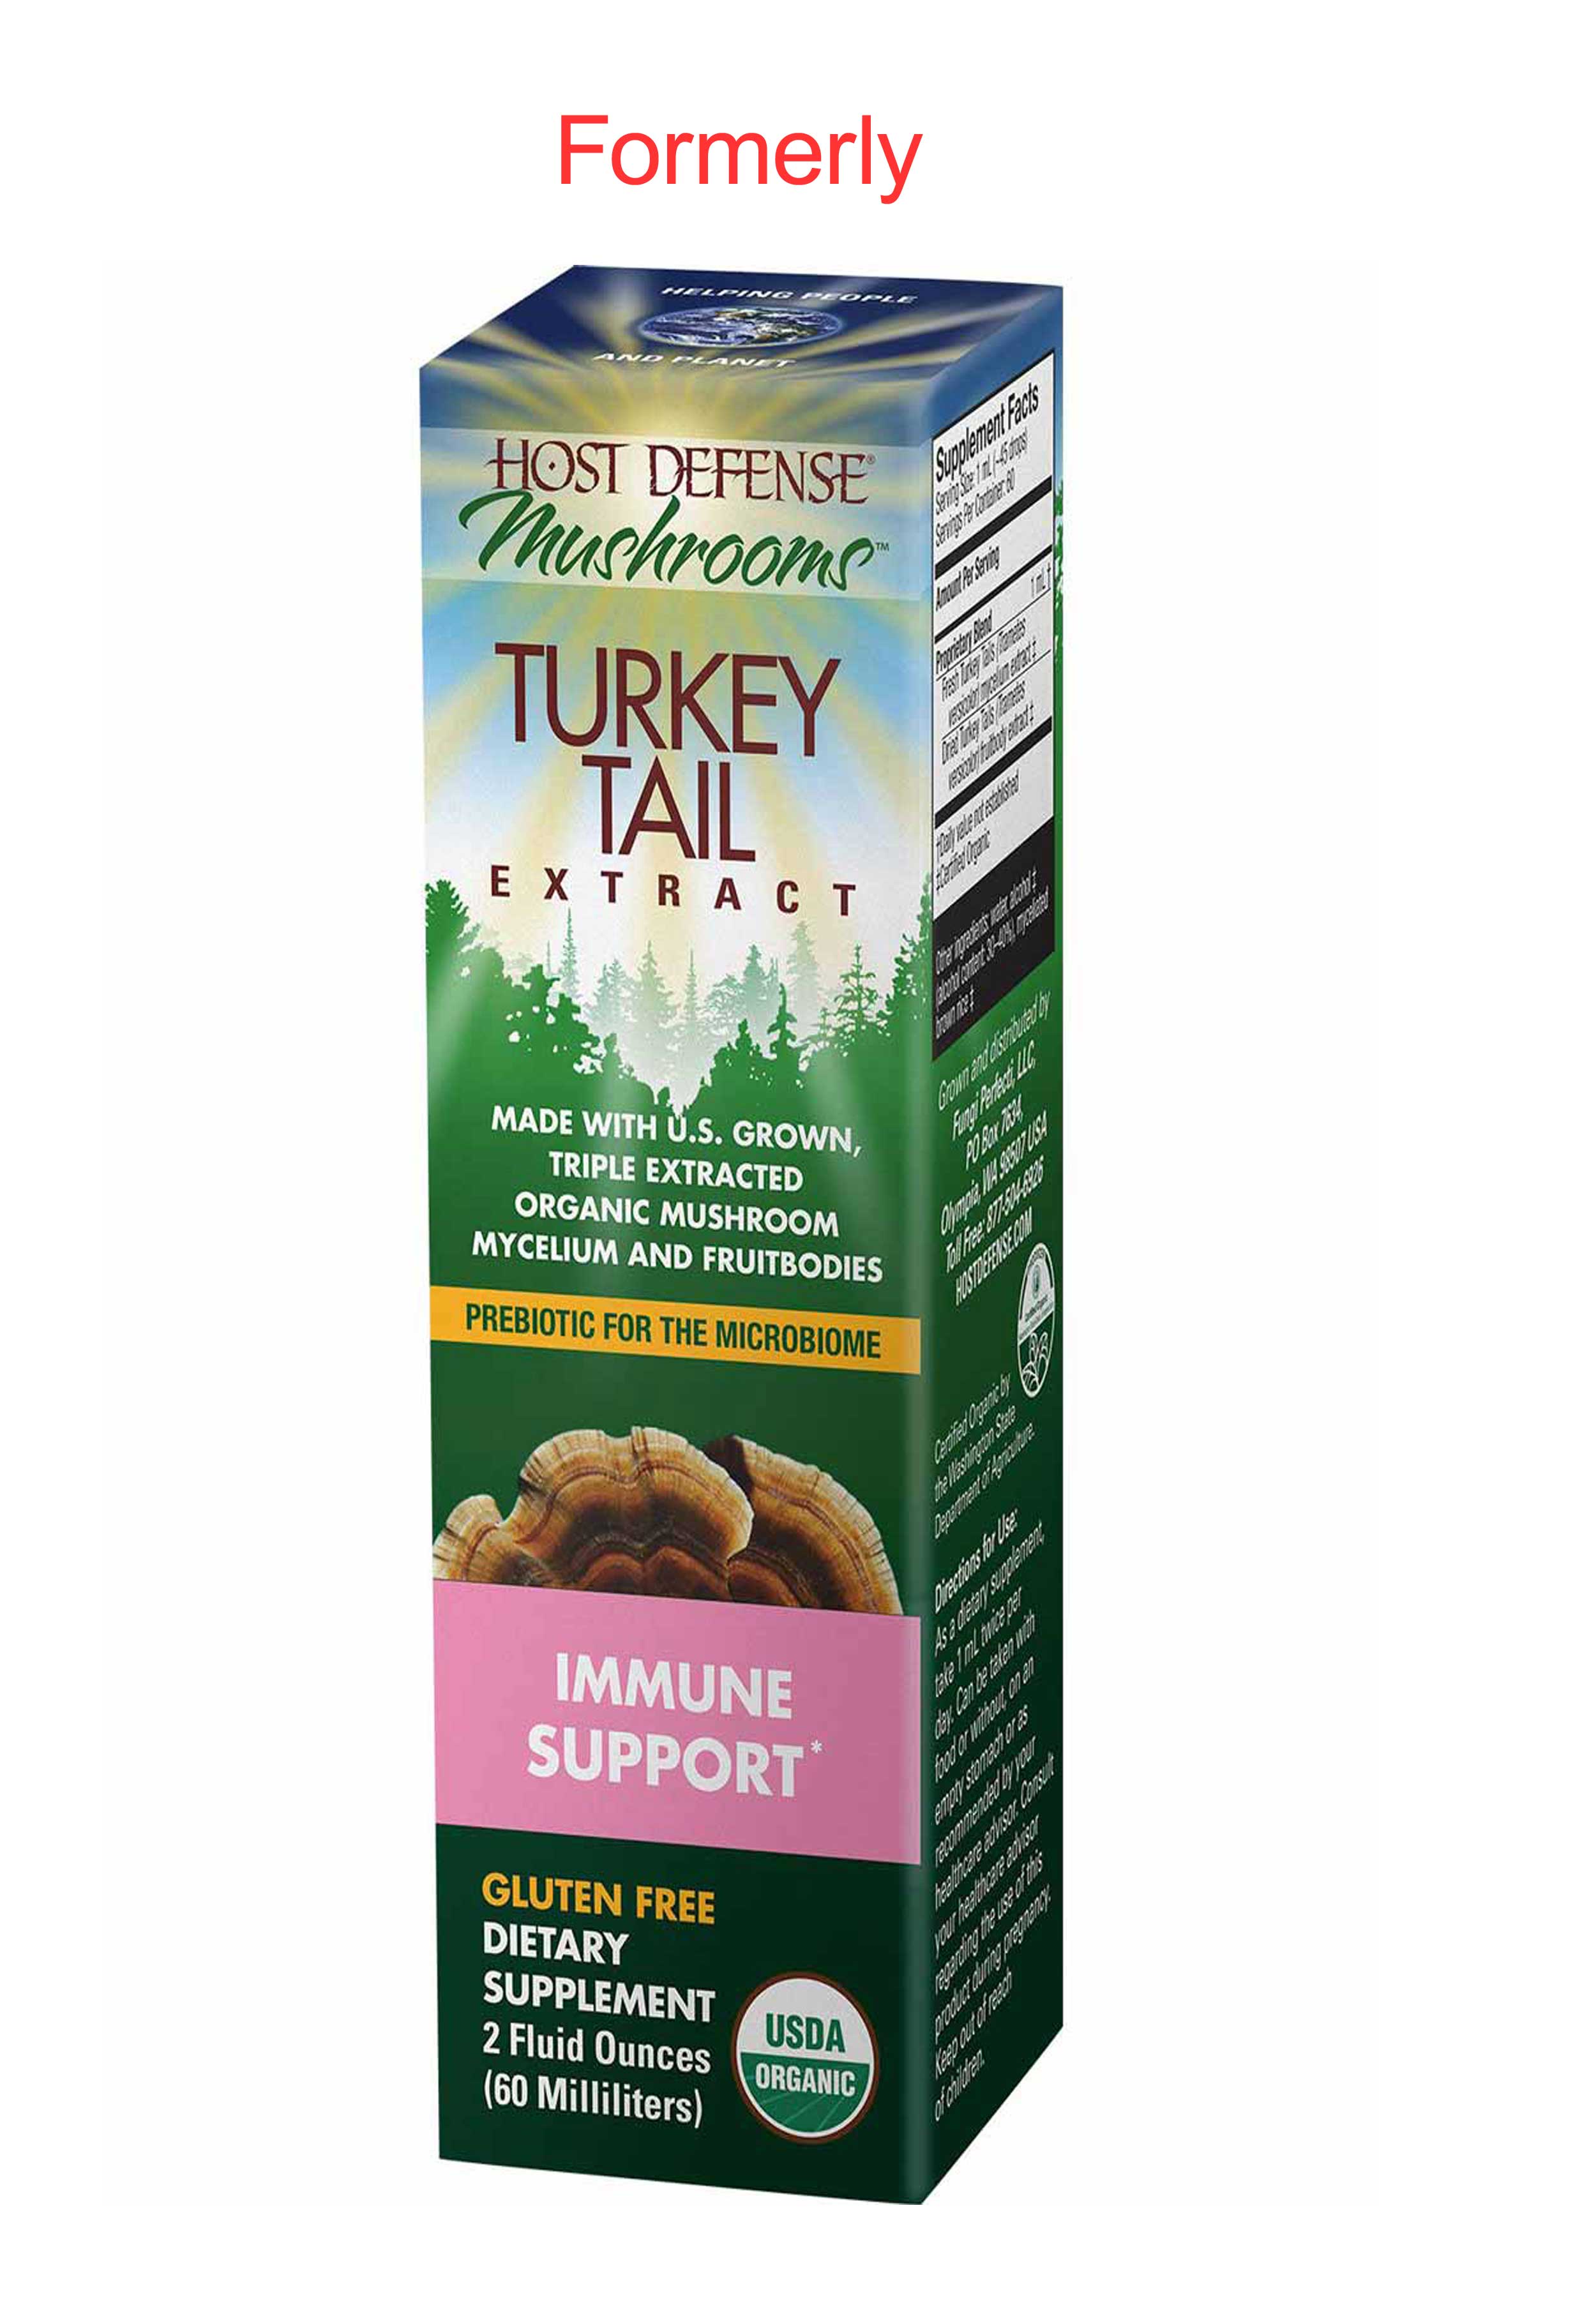 Host Defense Turkey Tail Extract Formerly